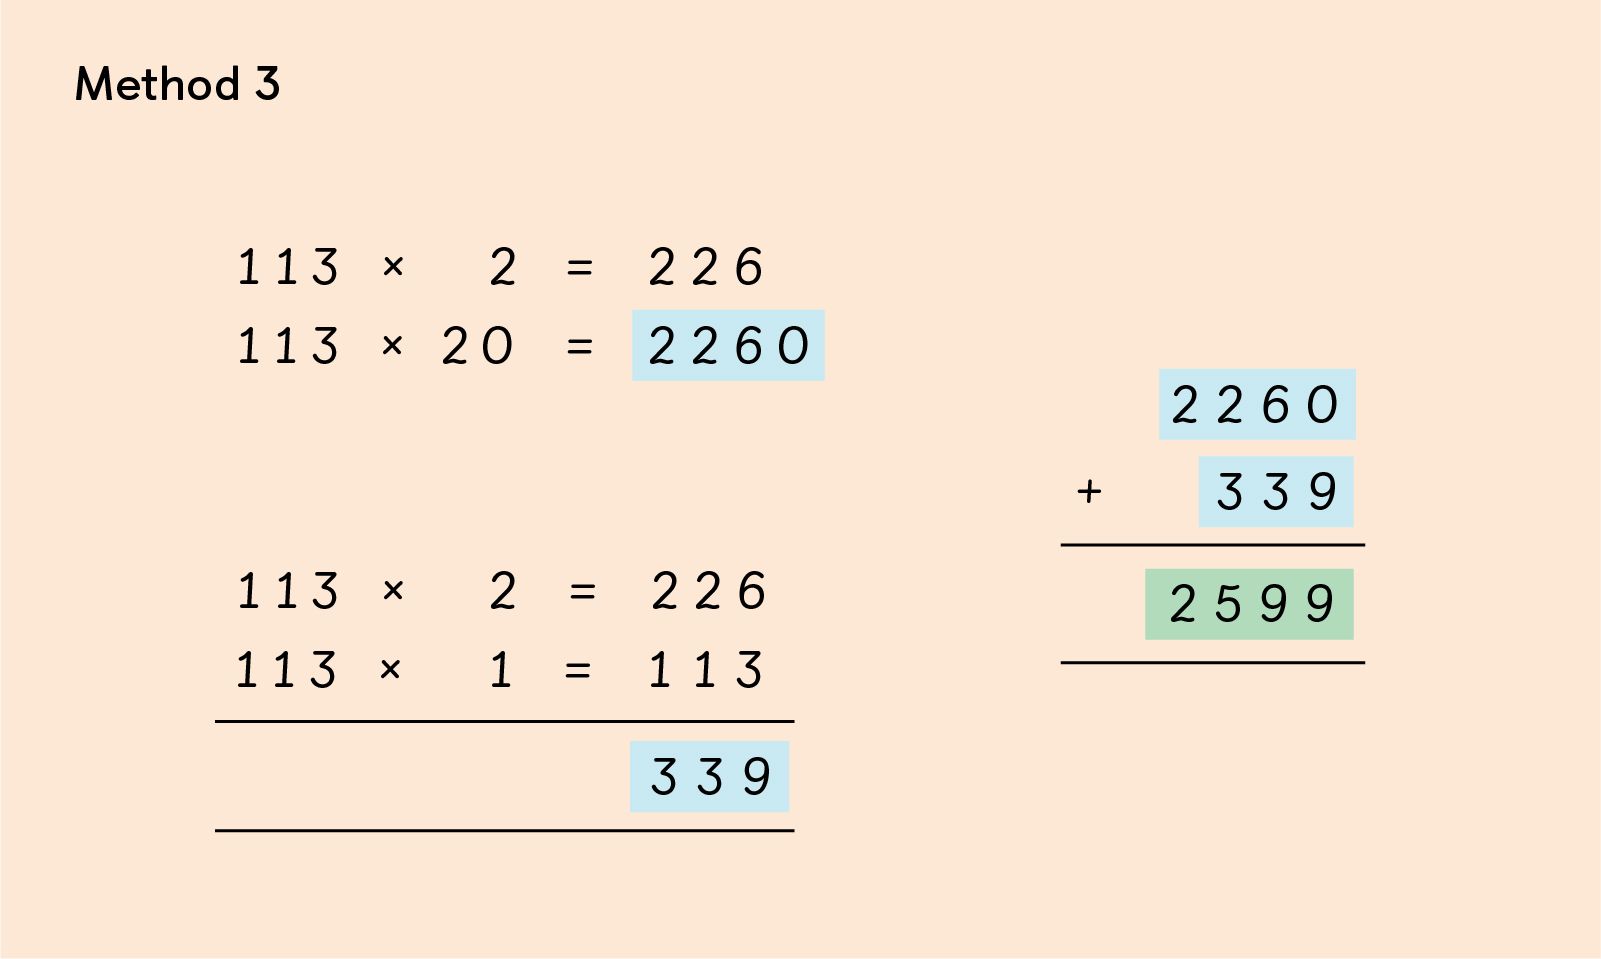 Method 3 To solve the maths multiplication problem 23 x 113. It was solved by using first 113 x 2, which led to the understanding 113 x 20 by adding a zero to the end. Then to figure out 113 x 3, it was split into two simple equations 113 x 2 as it was already know and added it to 113 x 1. The result was then added to the earlier calculation to reach the same answer of 2599.